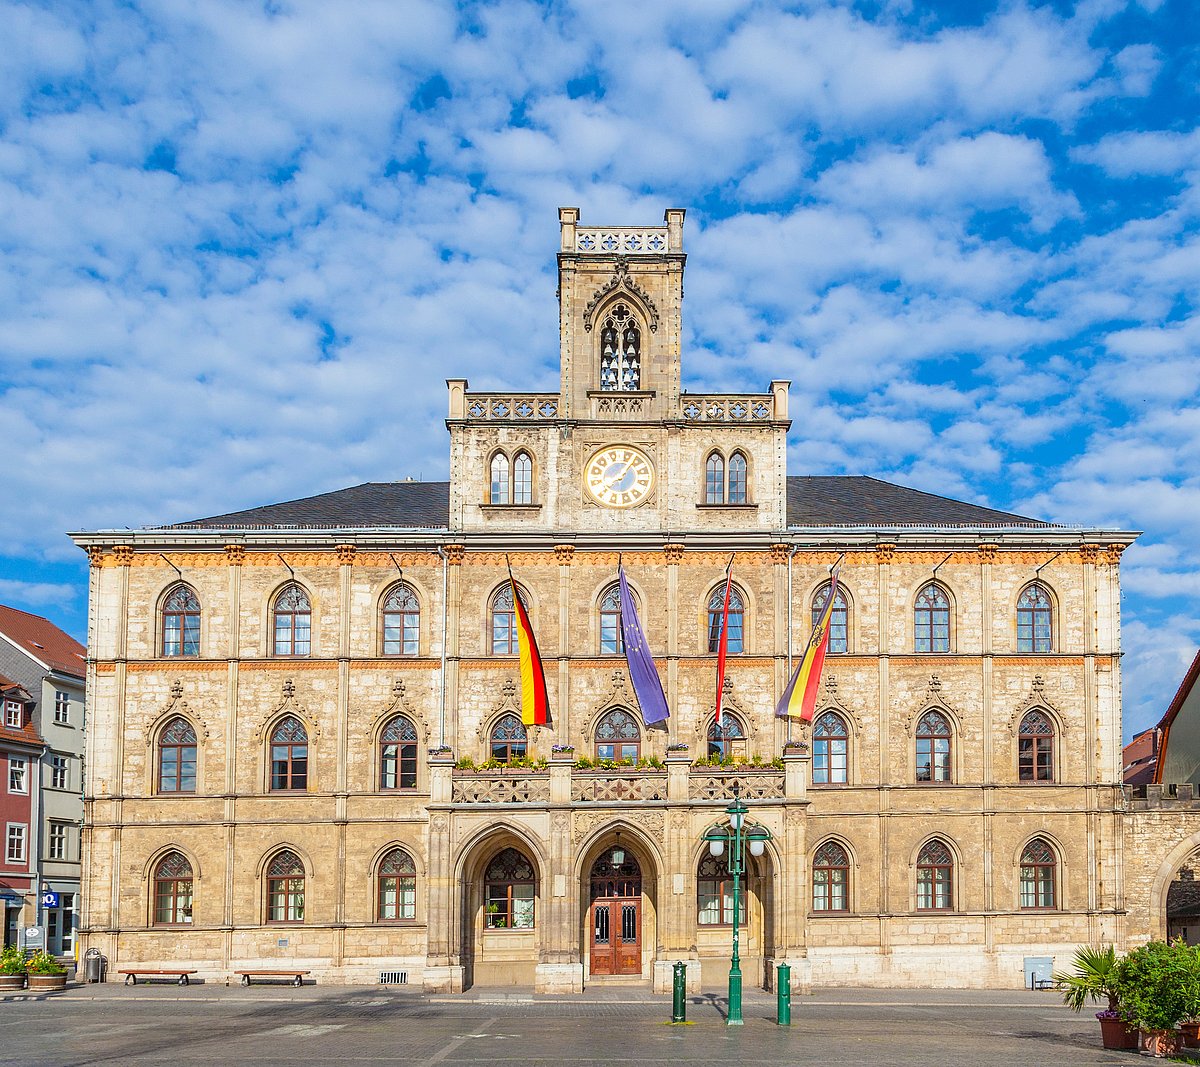 Weimar town hall with market place and flags, classical Weimar with beautiful architecture